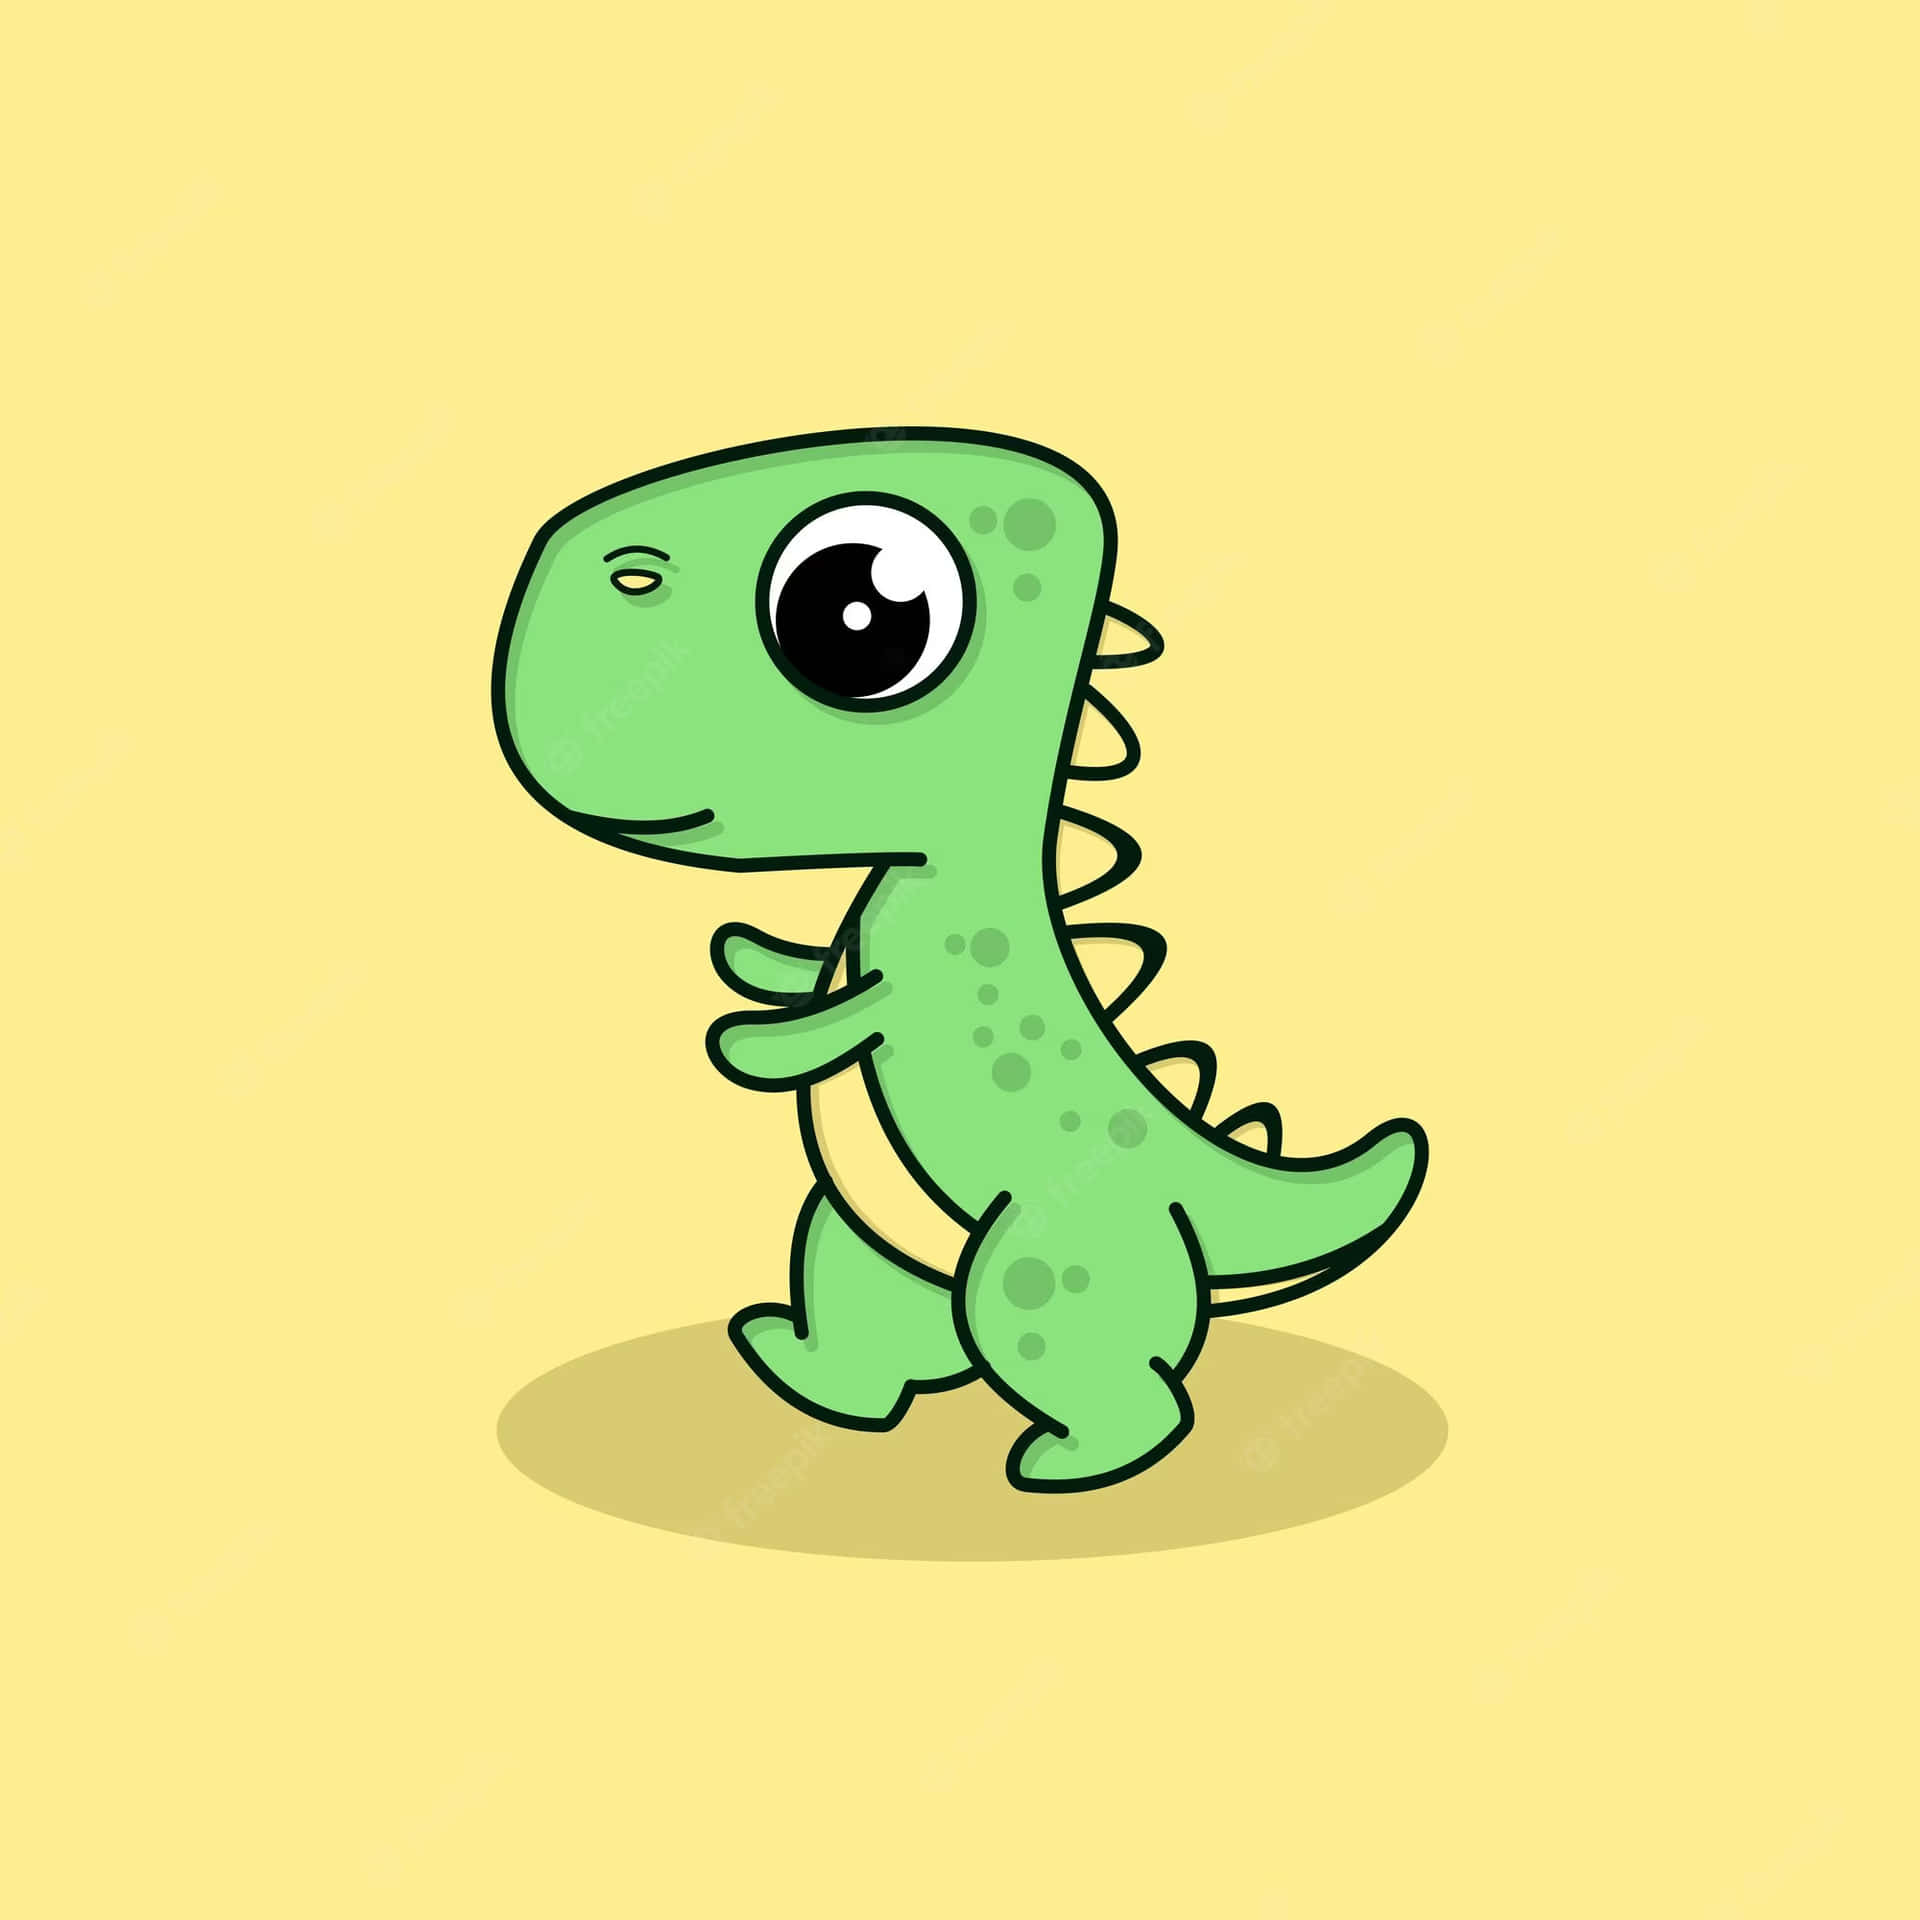 "Adorable Dino Excitement: Experience the Cuteness Overload"